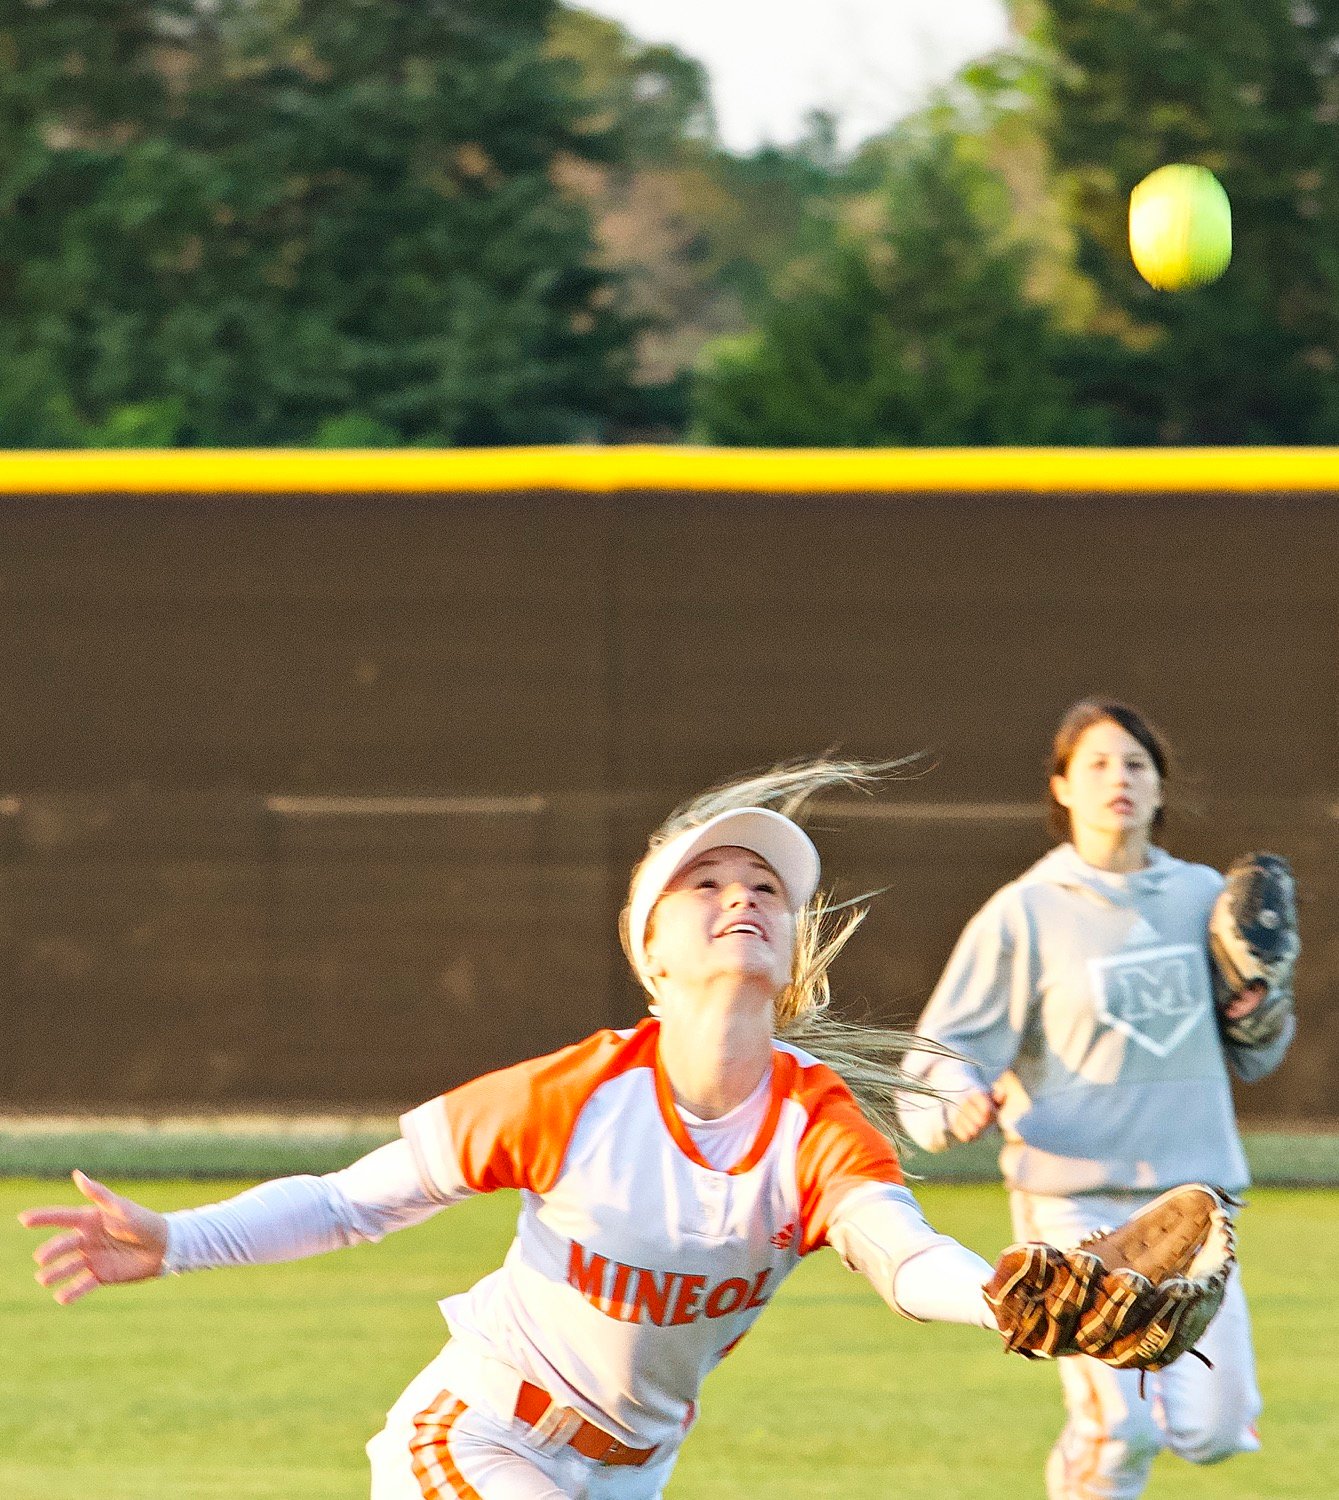 Emily Wiley of Mineola chases a fly ball but the gusty winds pushed it away from her. [see more senior night action]